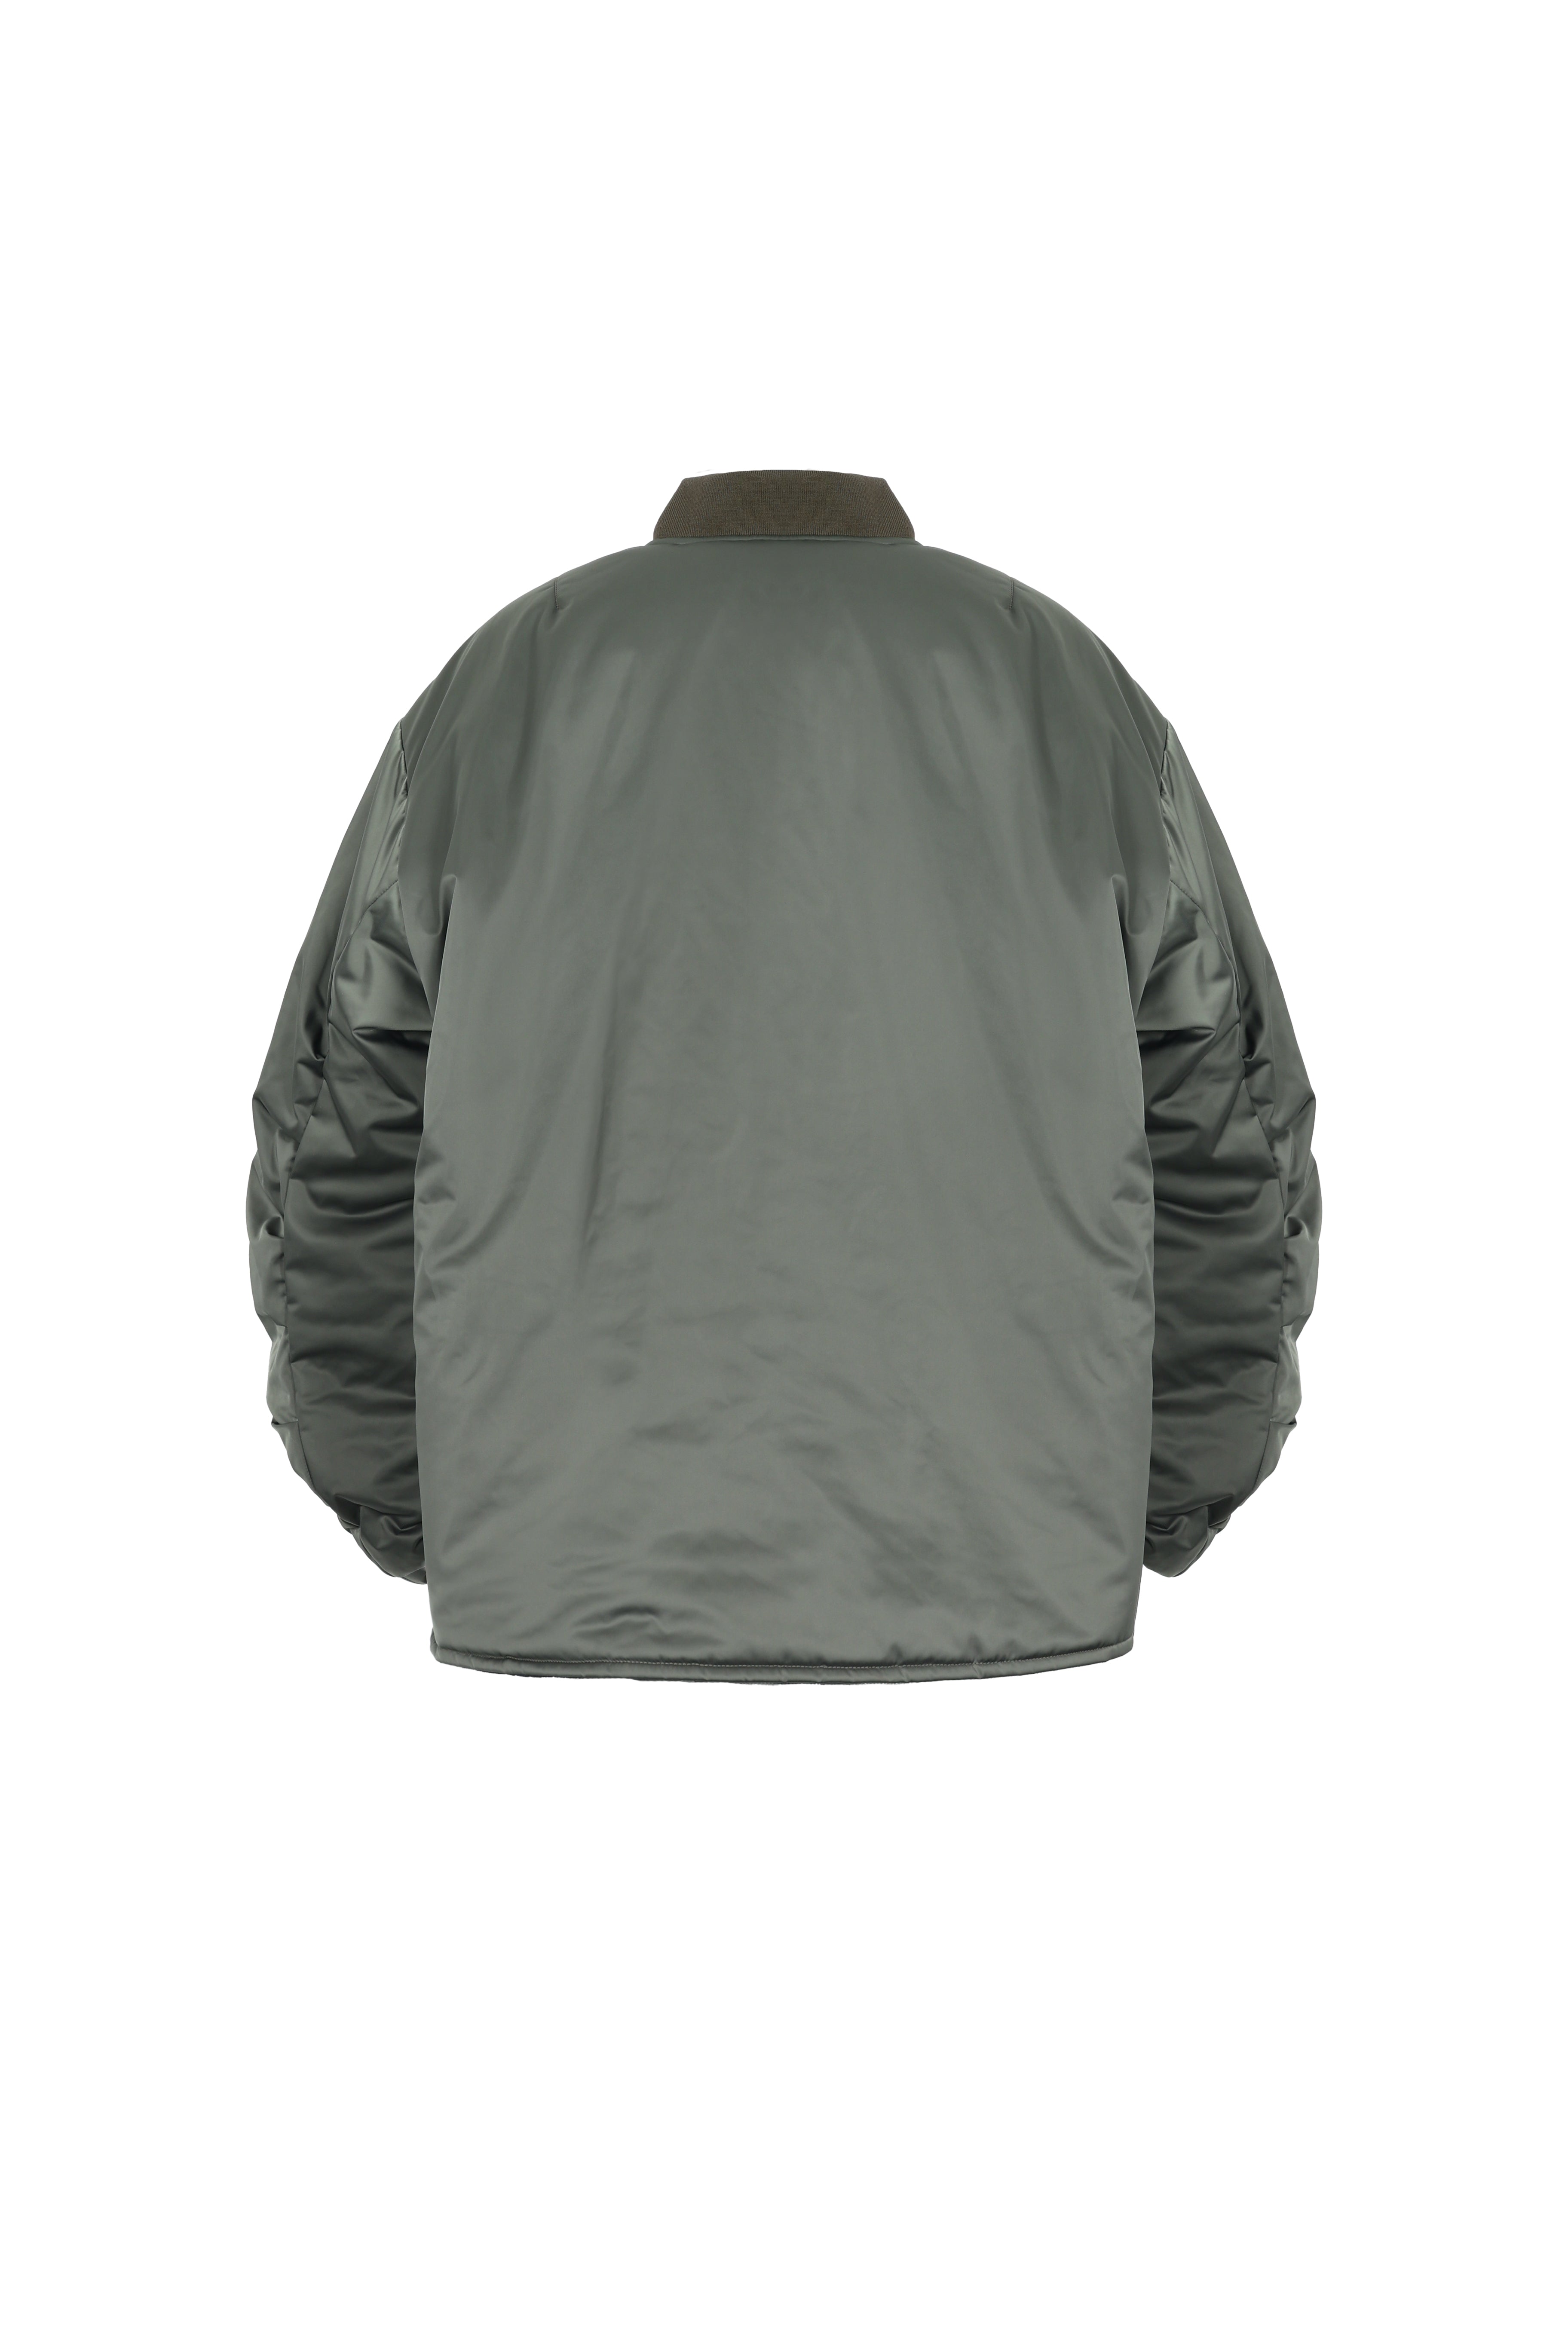 FLARED BOMBER JACKET in green amber